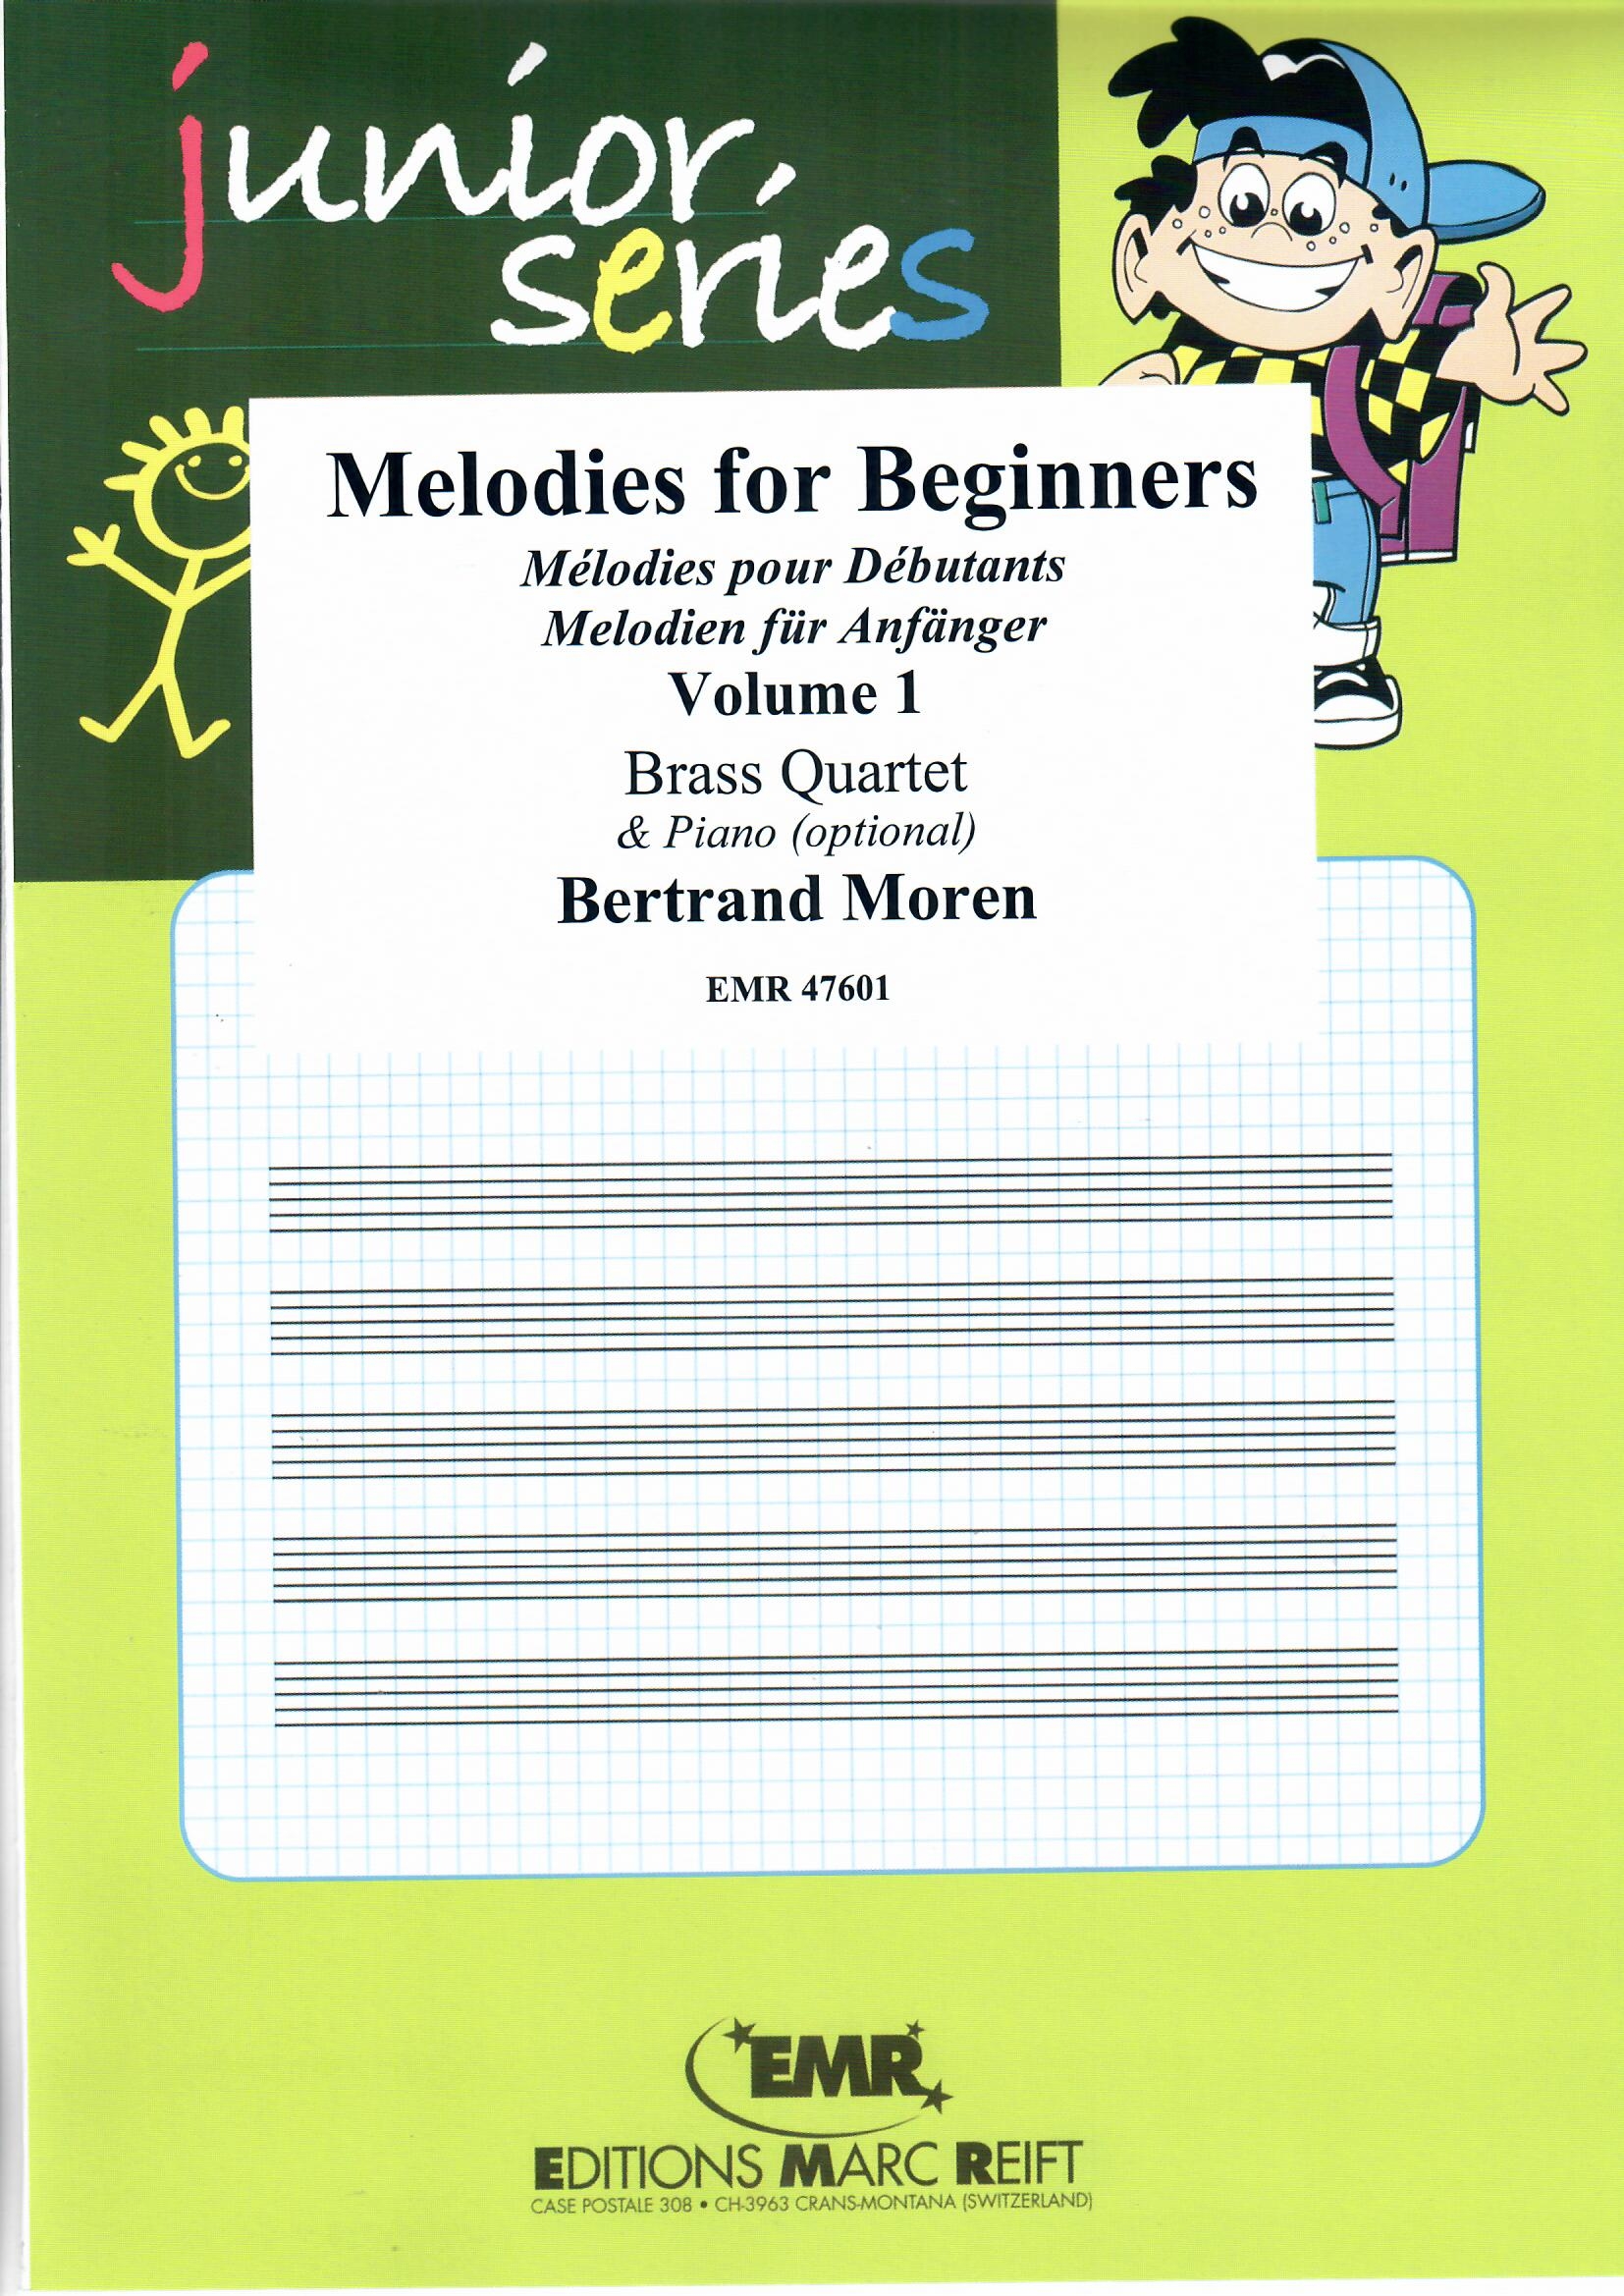 MELODIES FOR BEGINNERS VOLUME 1 - Quintet